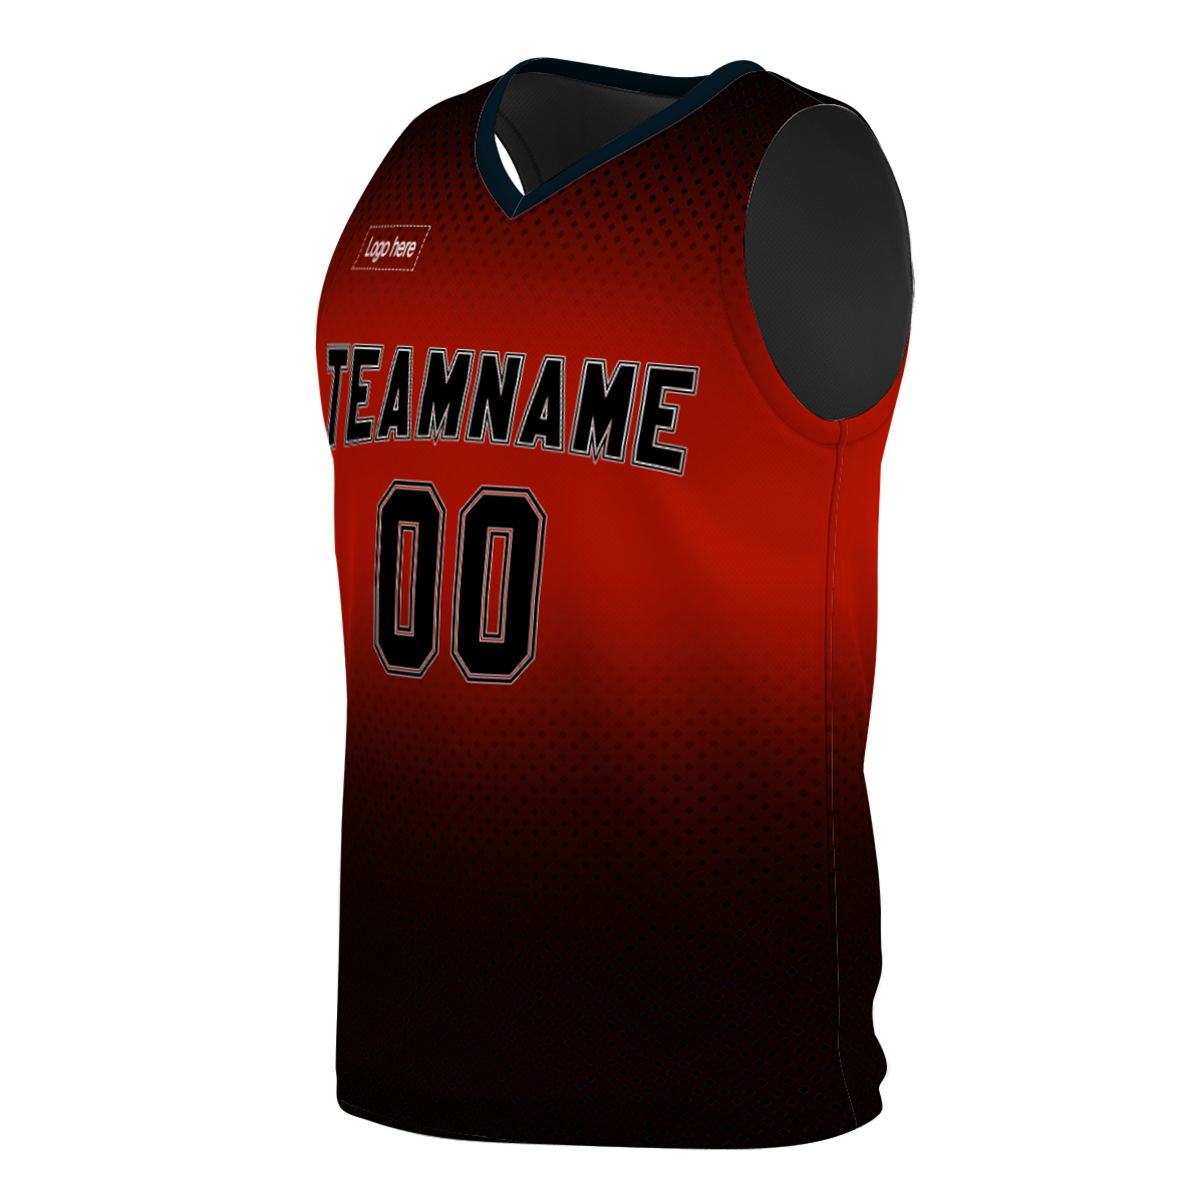 customize-basketball-team-wear-suits-print-on-demand-sublimation-breathable-basketball-jersey-uniforms-at-cj-pod-5